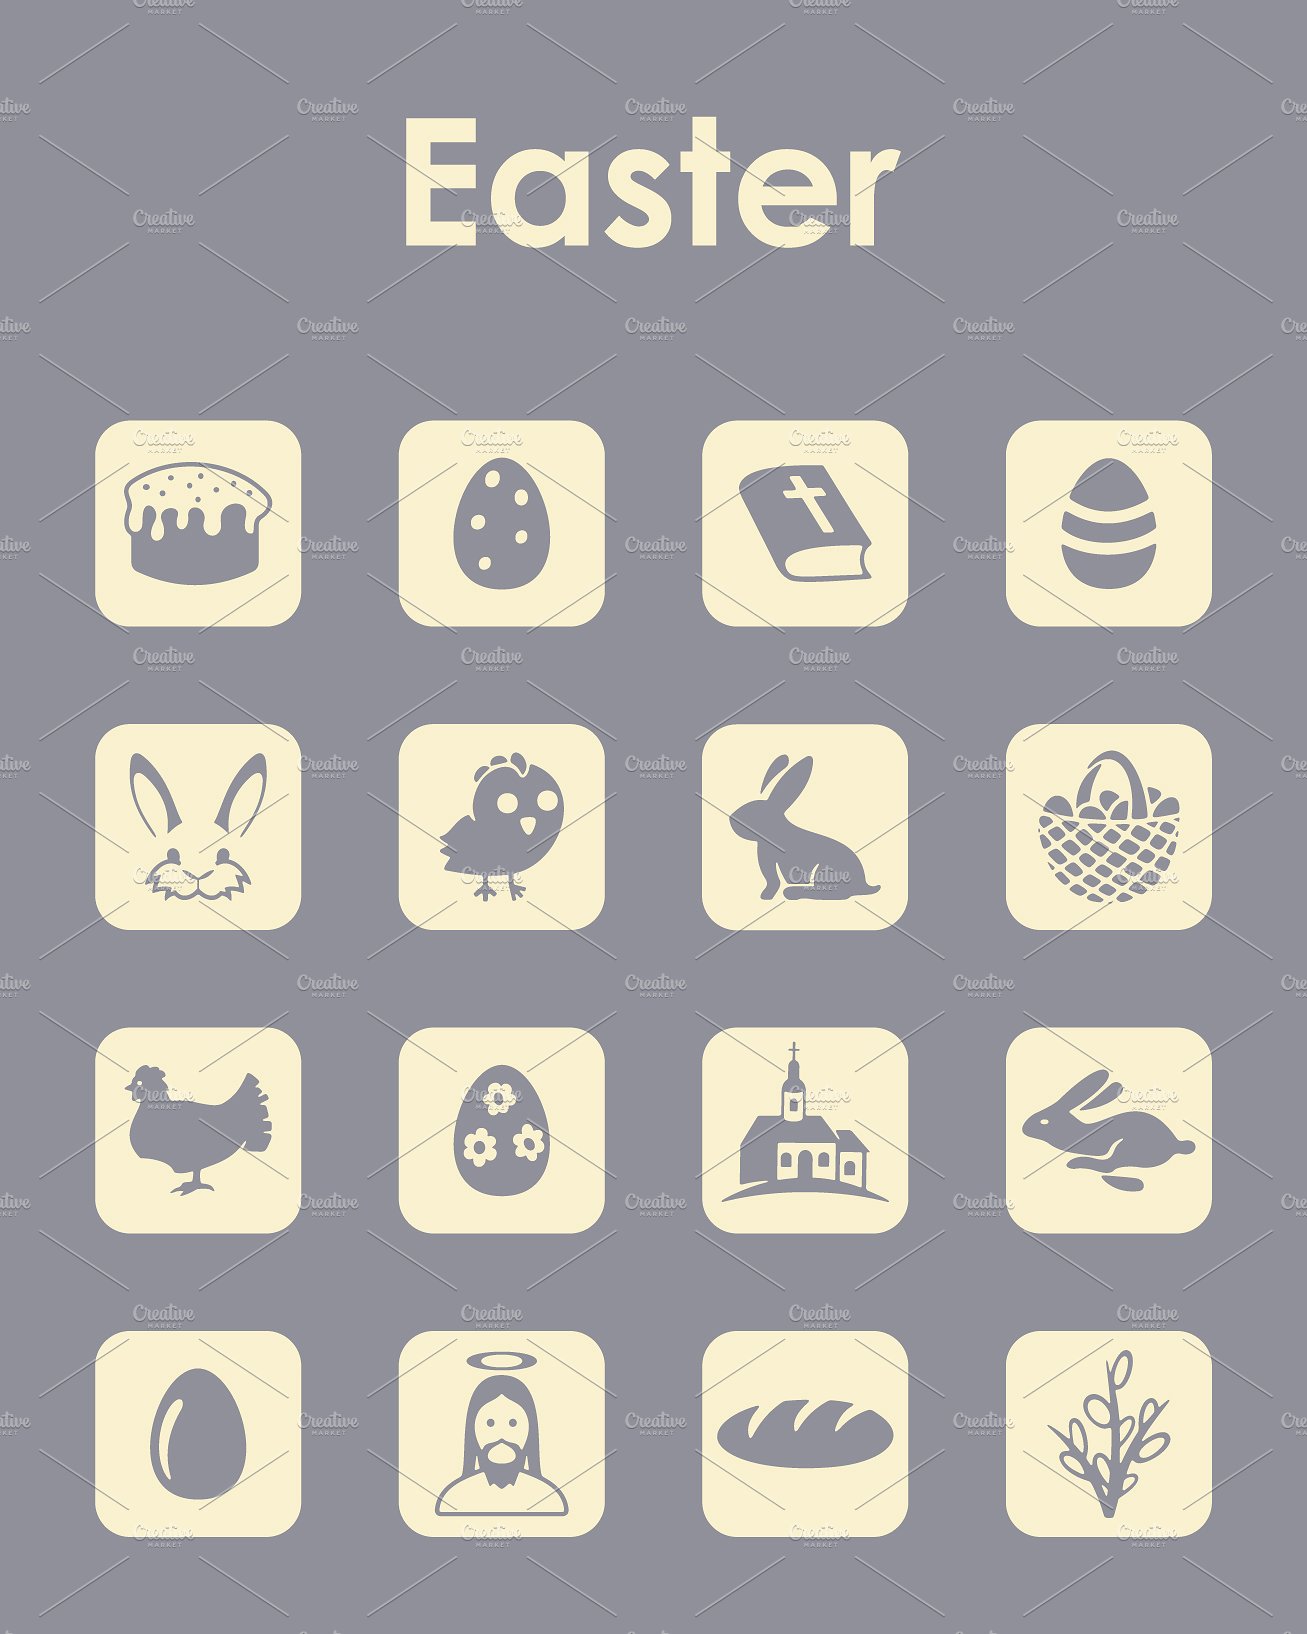 16 EASTER simple icons